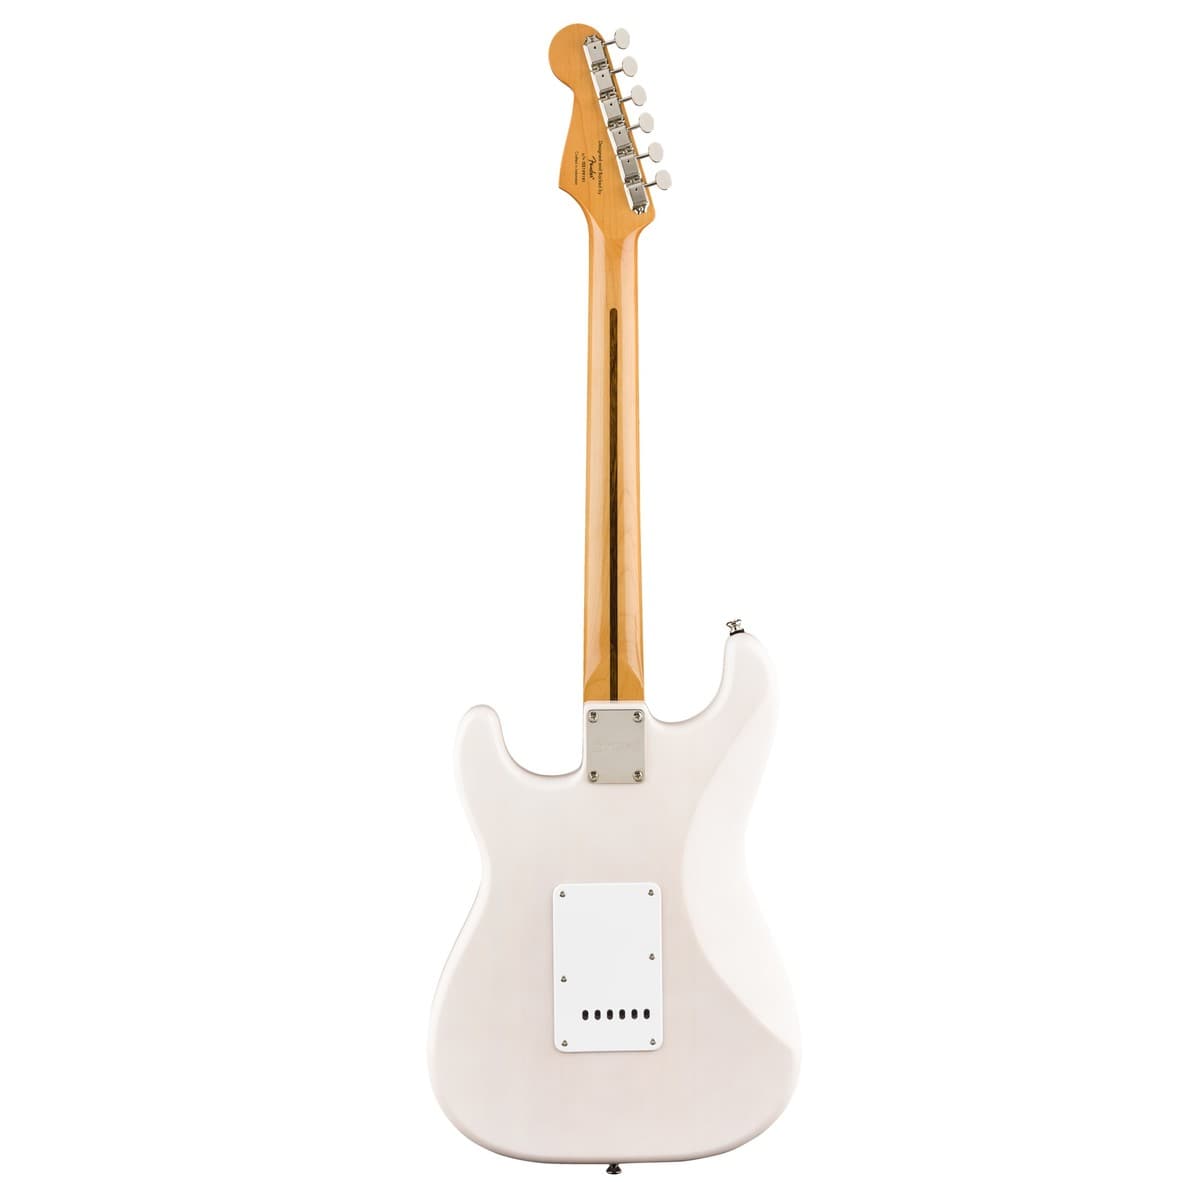 Squier Classic Vibe '50s Stratocaster - Maple Fingerboard - White Blonde